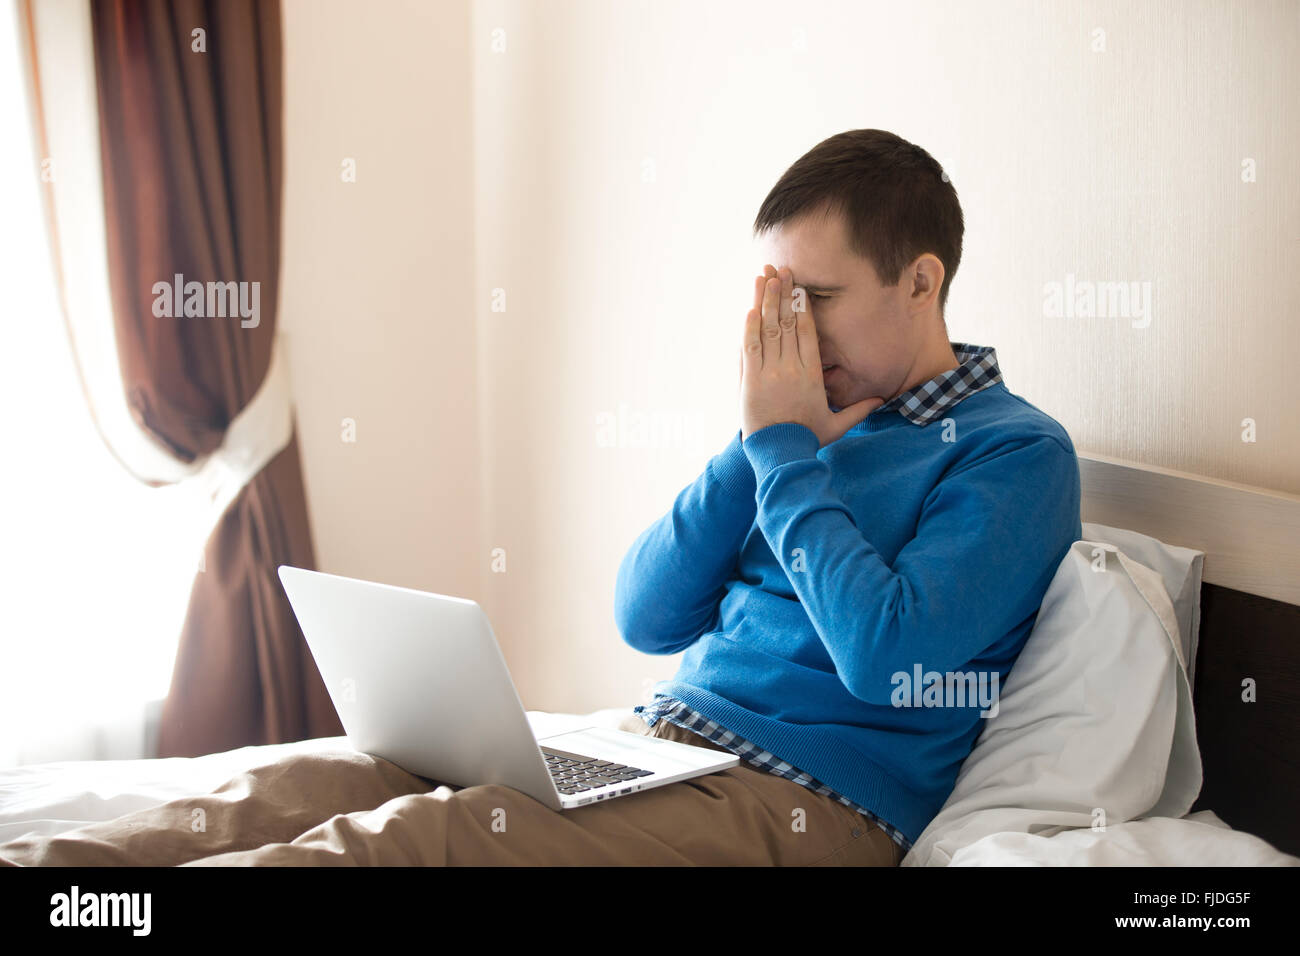 Portrait of young stressed man sitting on bed with laptop wearing smart casual clothing, holding his head in hands Stock Photo